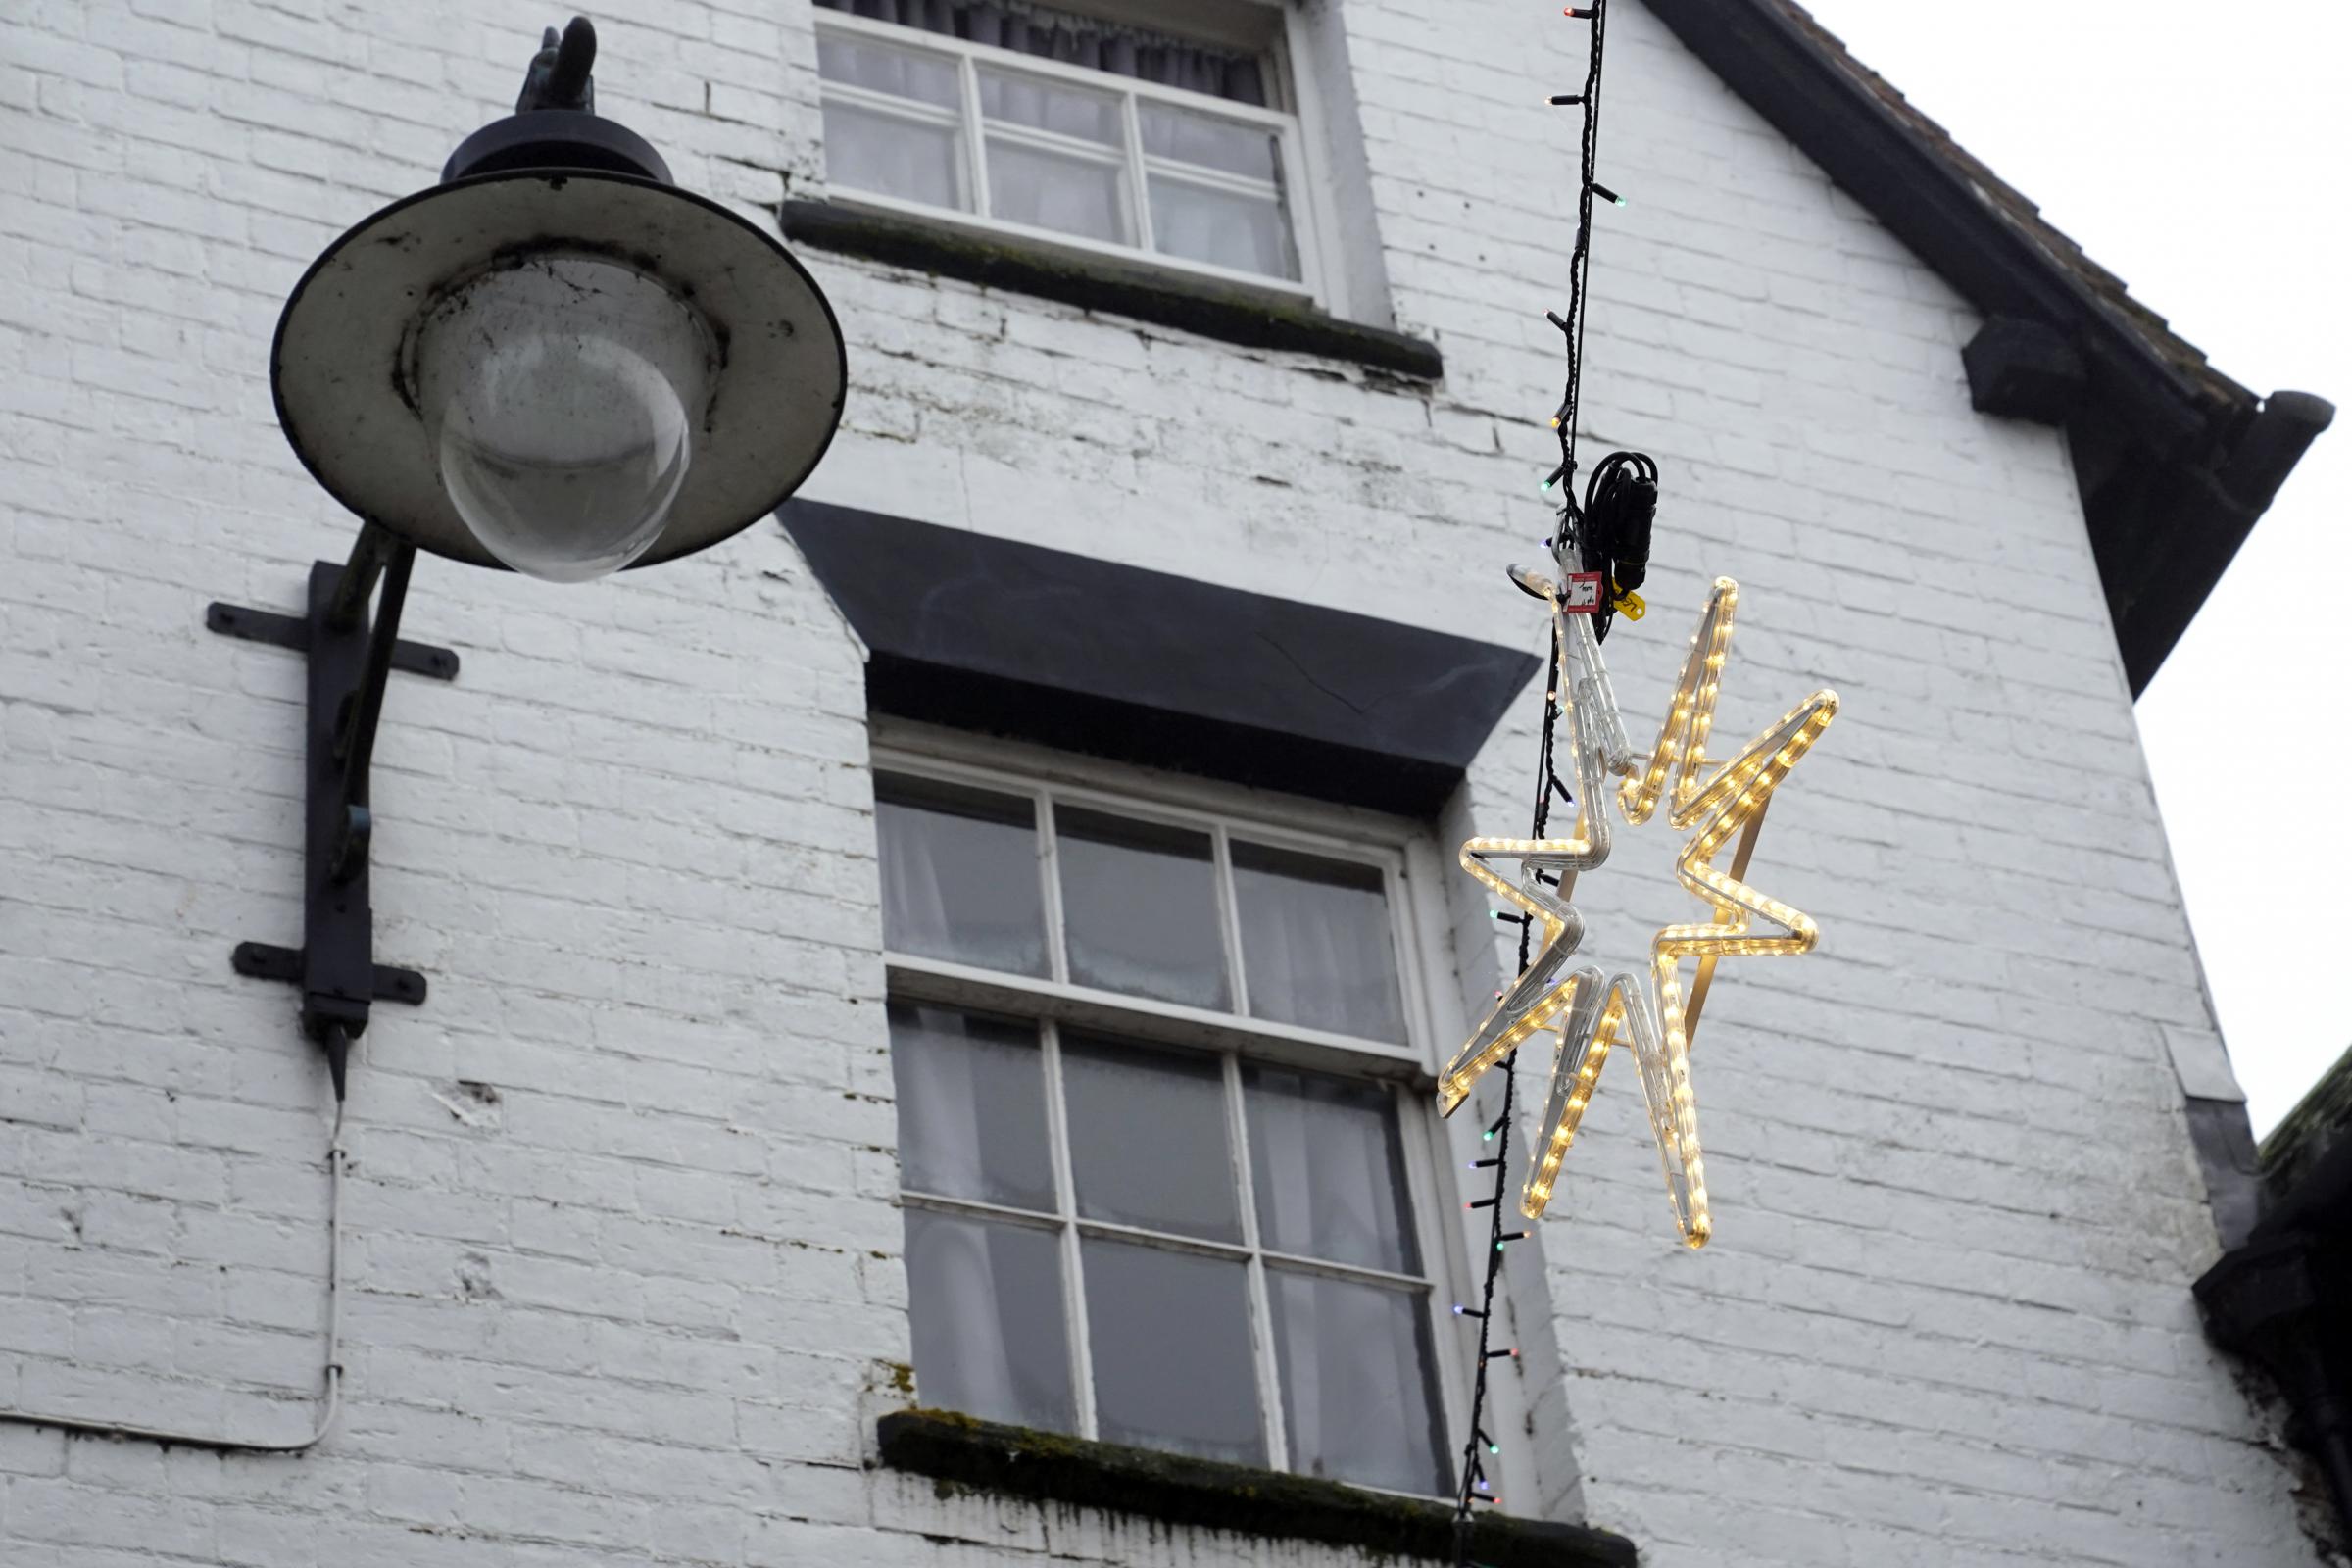 A dodgy Christmas street light in Leominster.